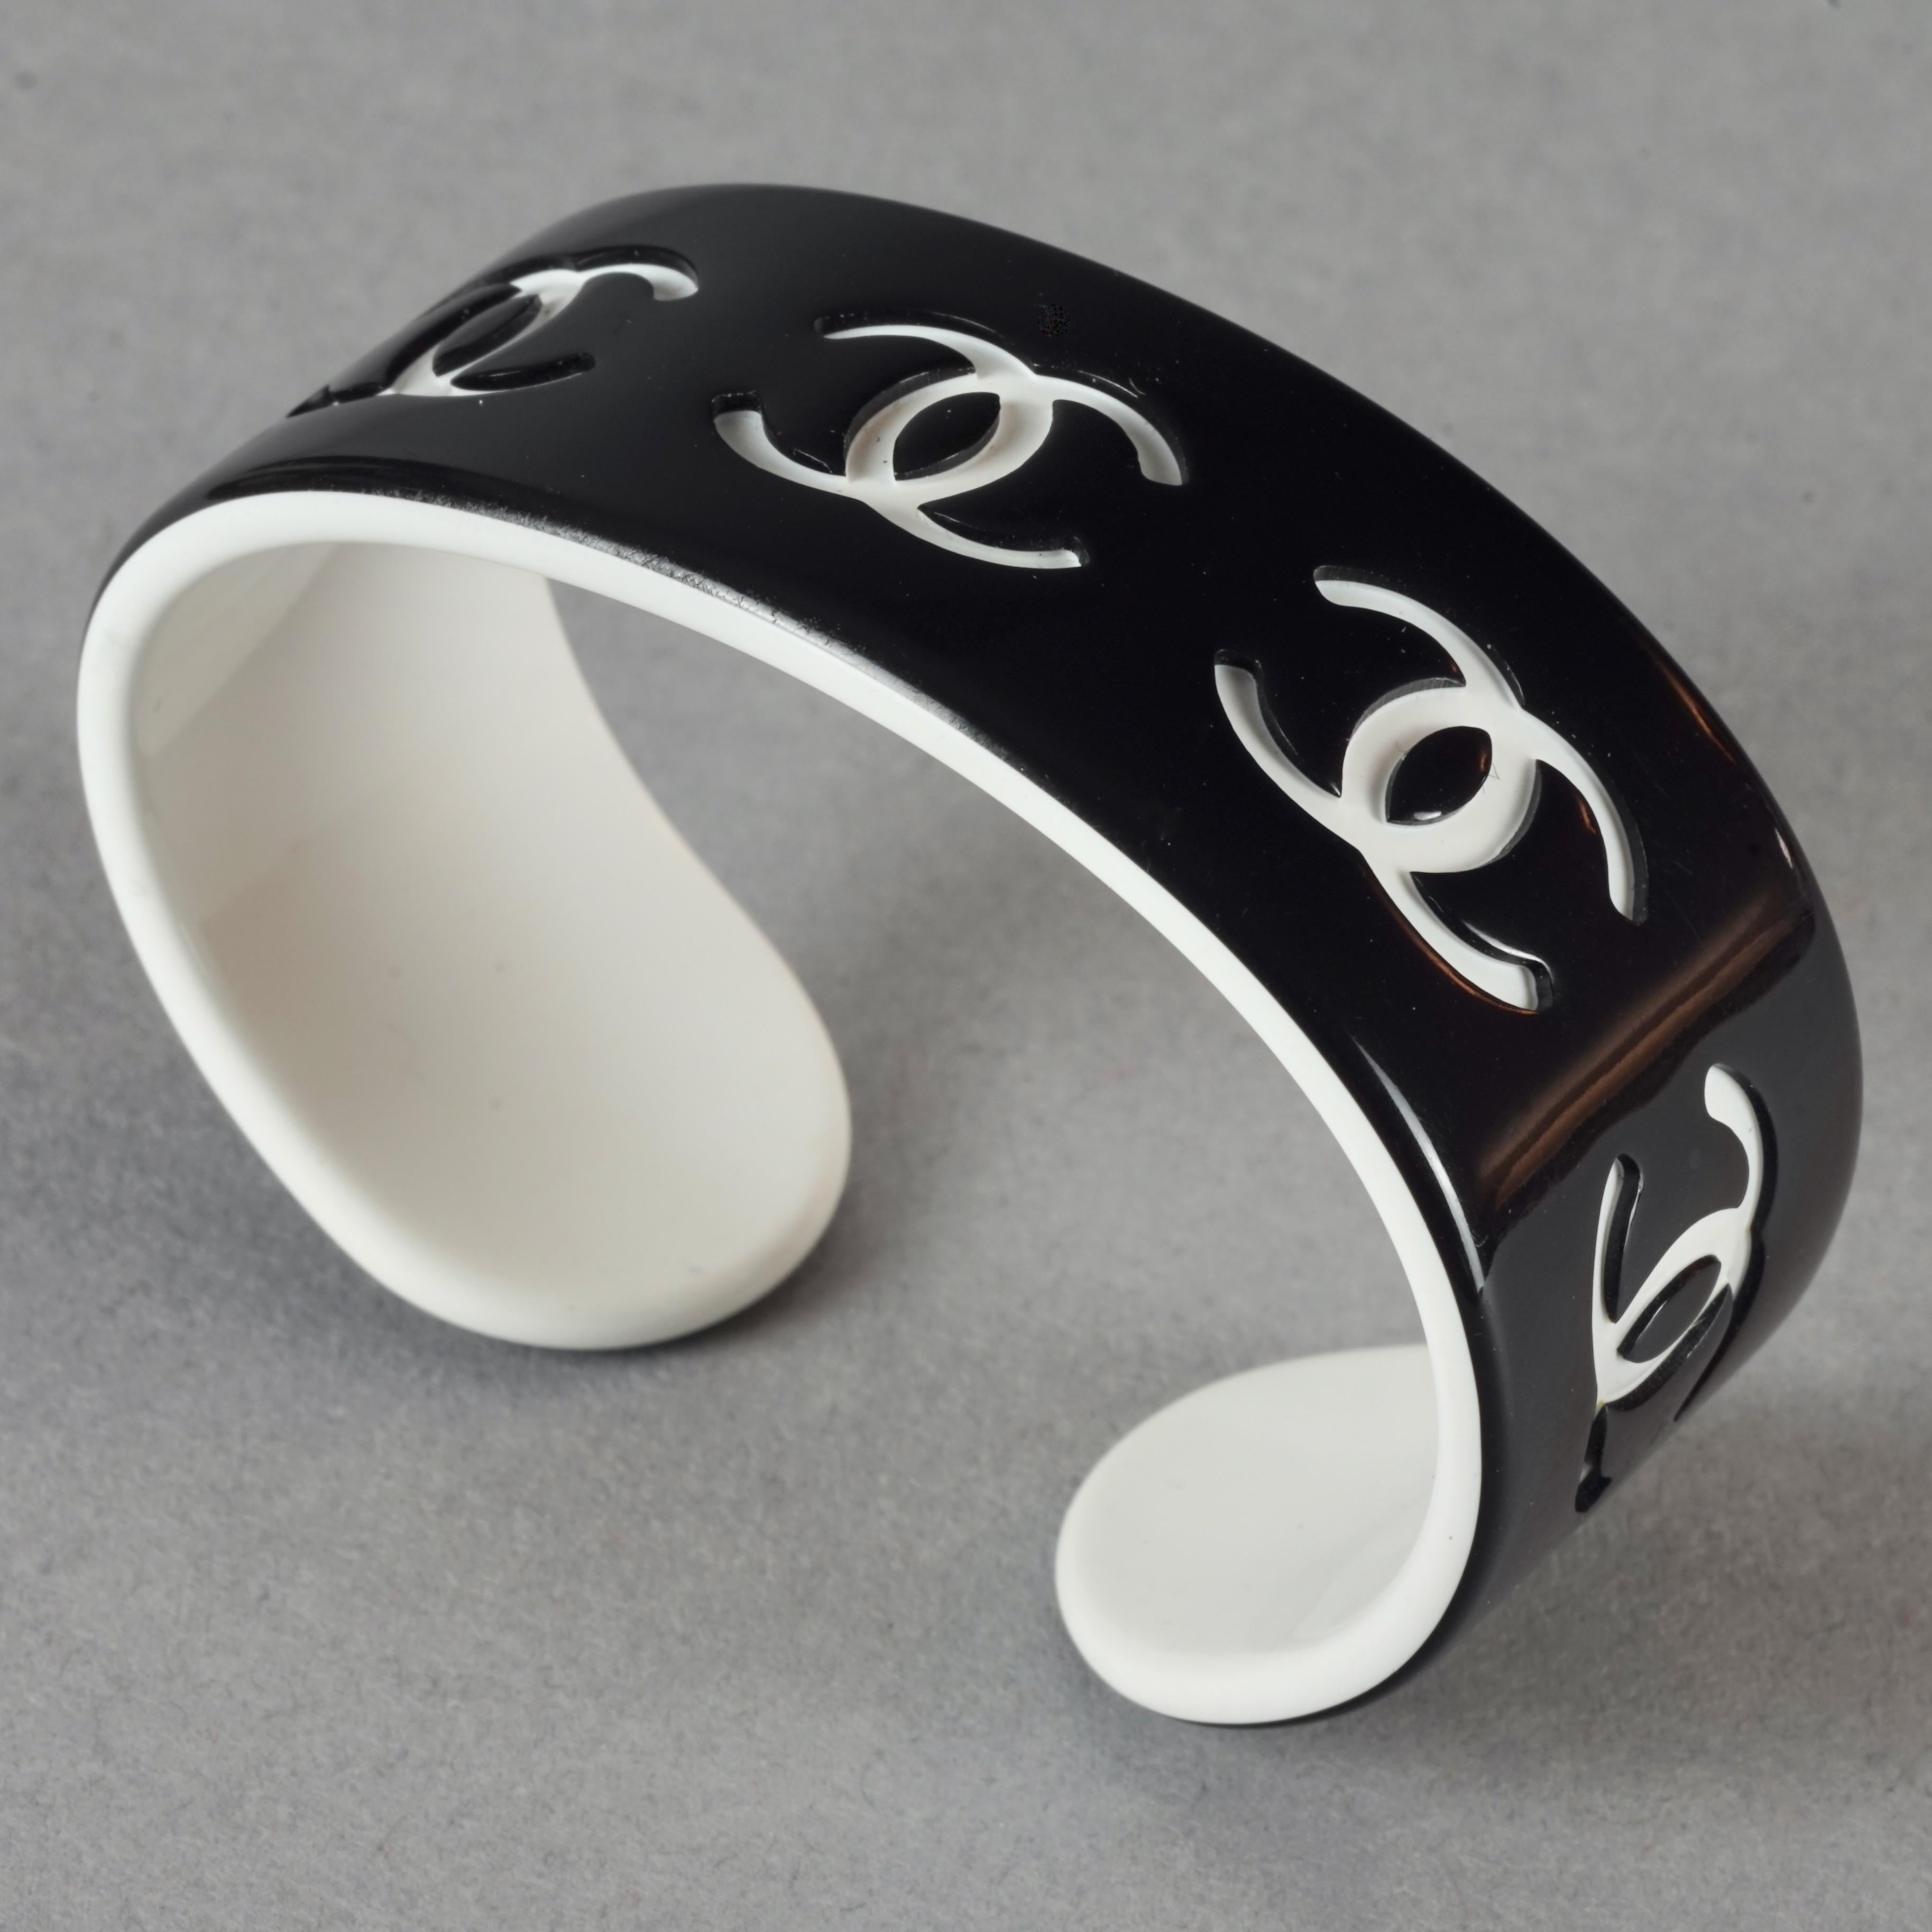 Vintage CHANEL 2002 Black and White CC Logo Perspex Cuff Bracelet

Measurements:
Height: 0.86 inch (2.2 cm)
Maximum Circumference: 6.18 inches (15.7 cm) including the opening

Features:
- 100% Authentic CHANEL.
- Black perspex cuff bracelet with